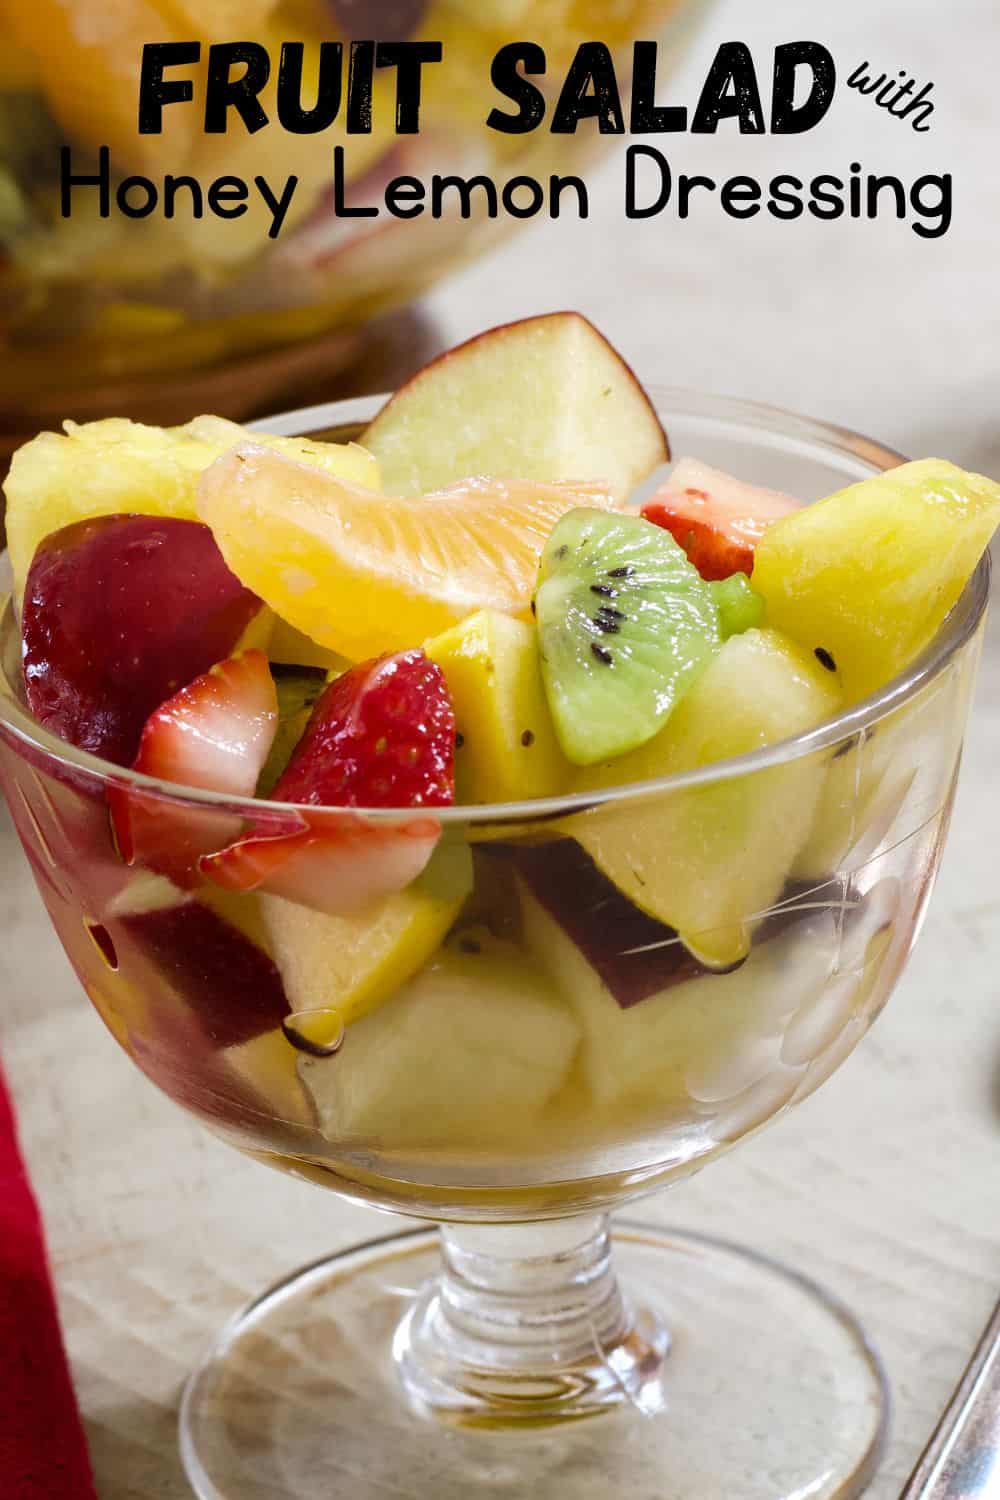 Close up view of a small glass dessert bowl filled with fresh fruit salad.